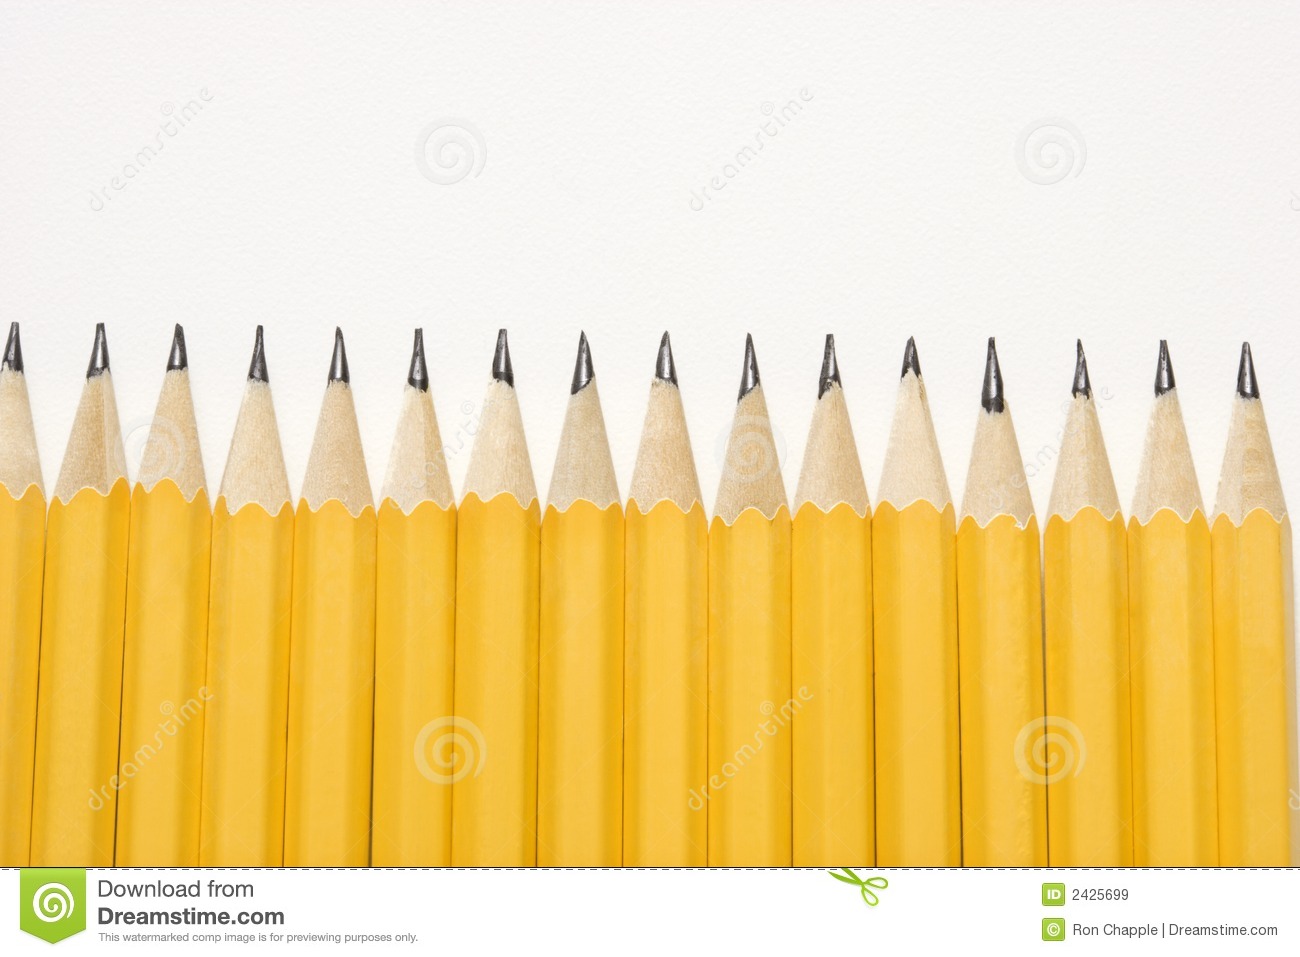 Sharp Pencils Lined Up In An Even Row